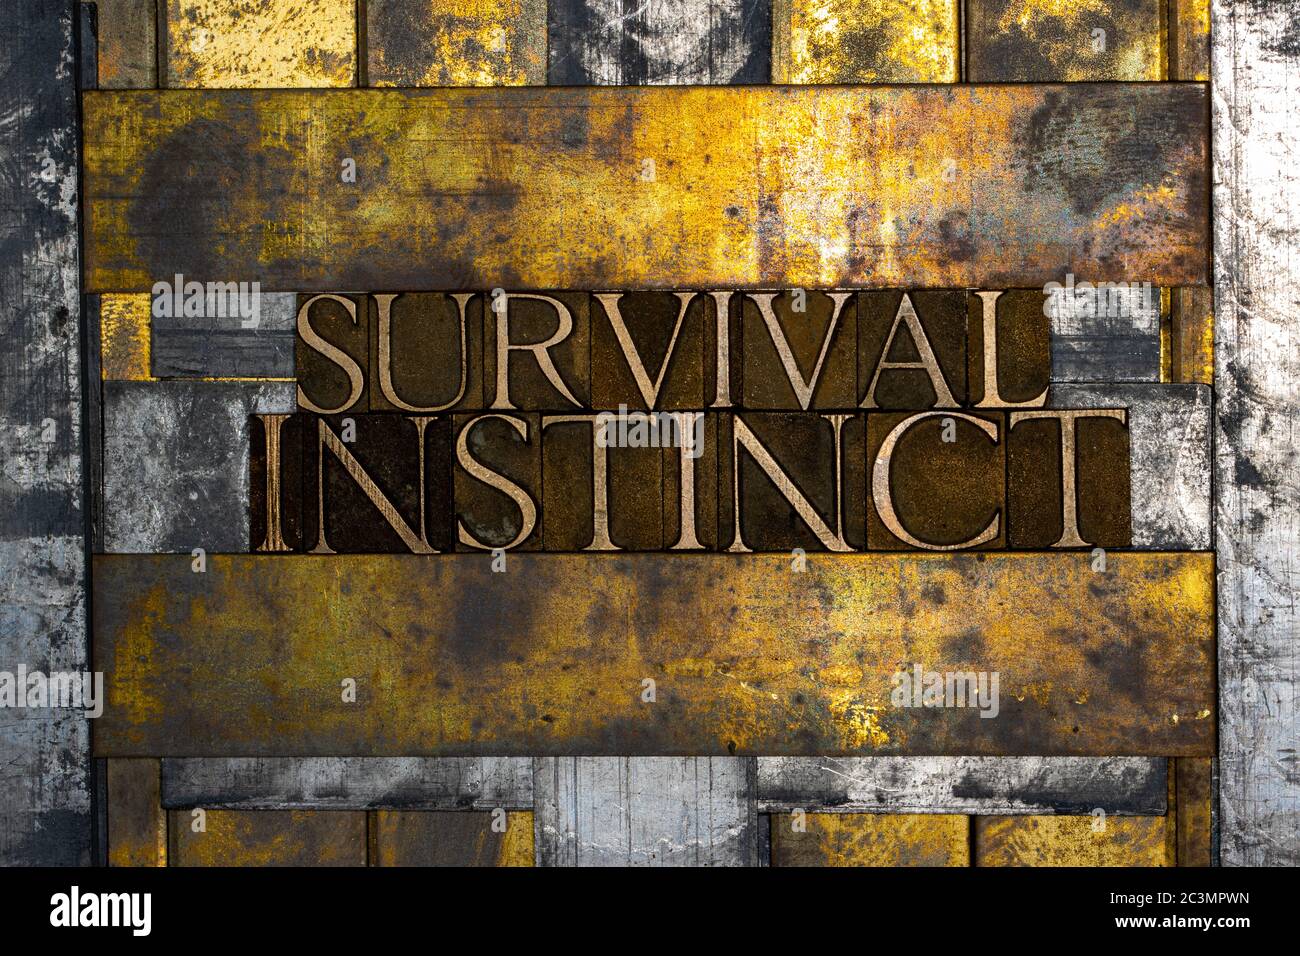 Survival Instinct text formed with real authentic typeset letters on vintage textured silver grunge copper and gold background Stock Photo